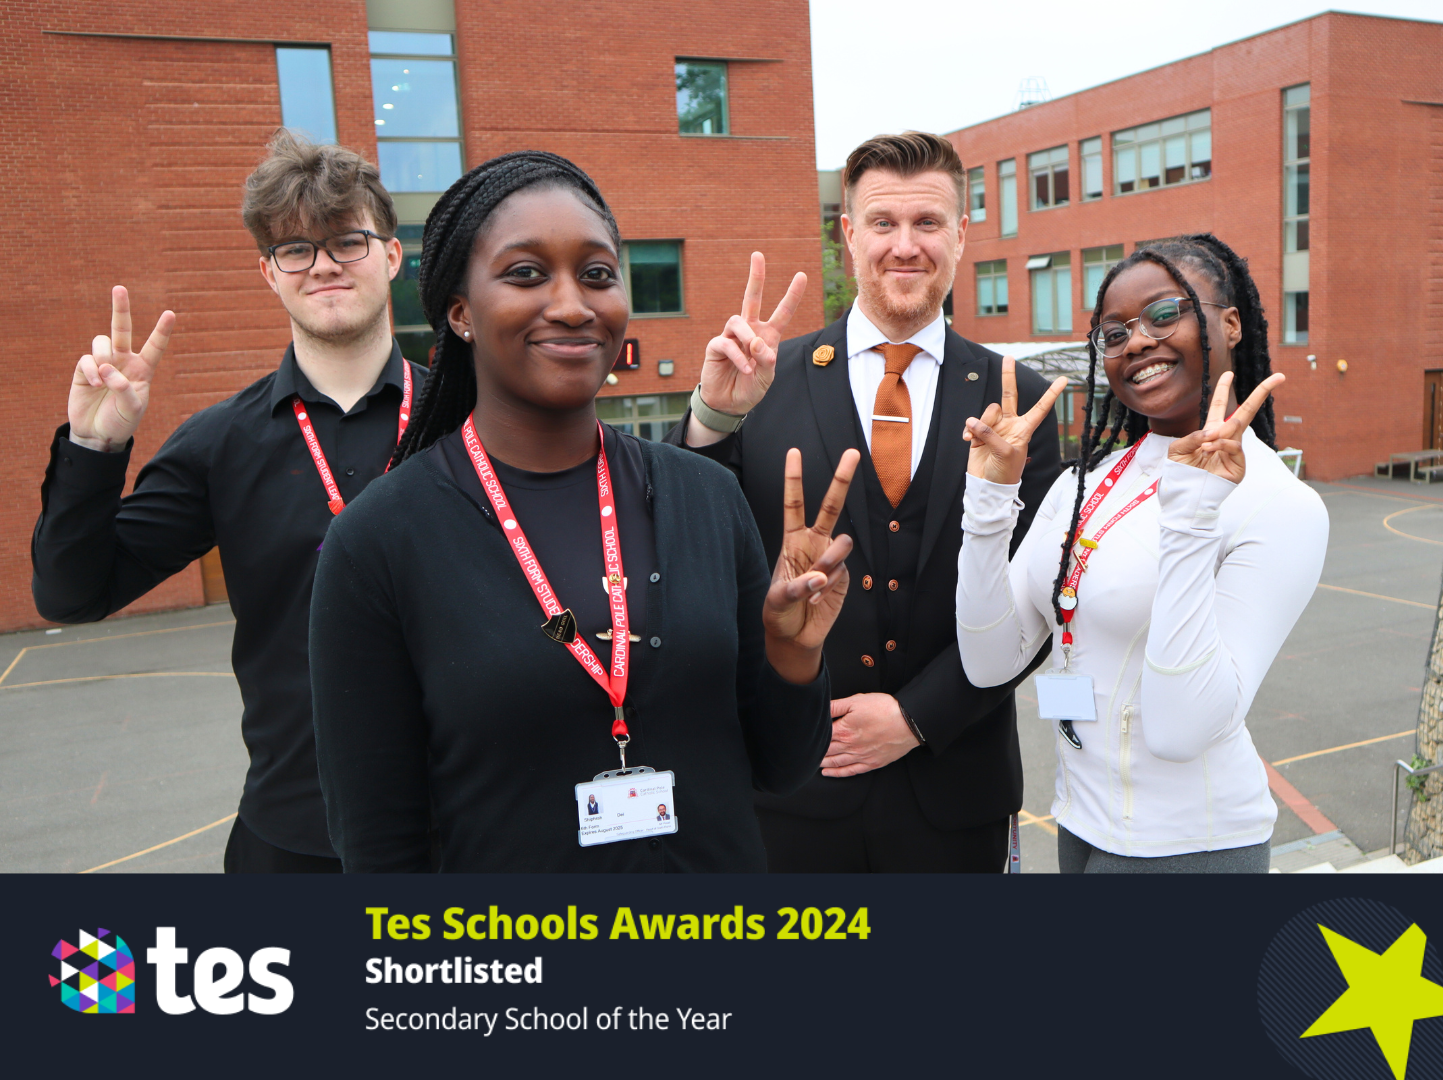 Cardinal Pole School shortlisted for School of the Year Award - Diocese of Westminster